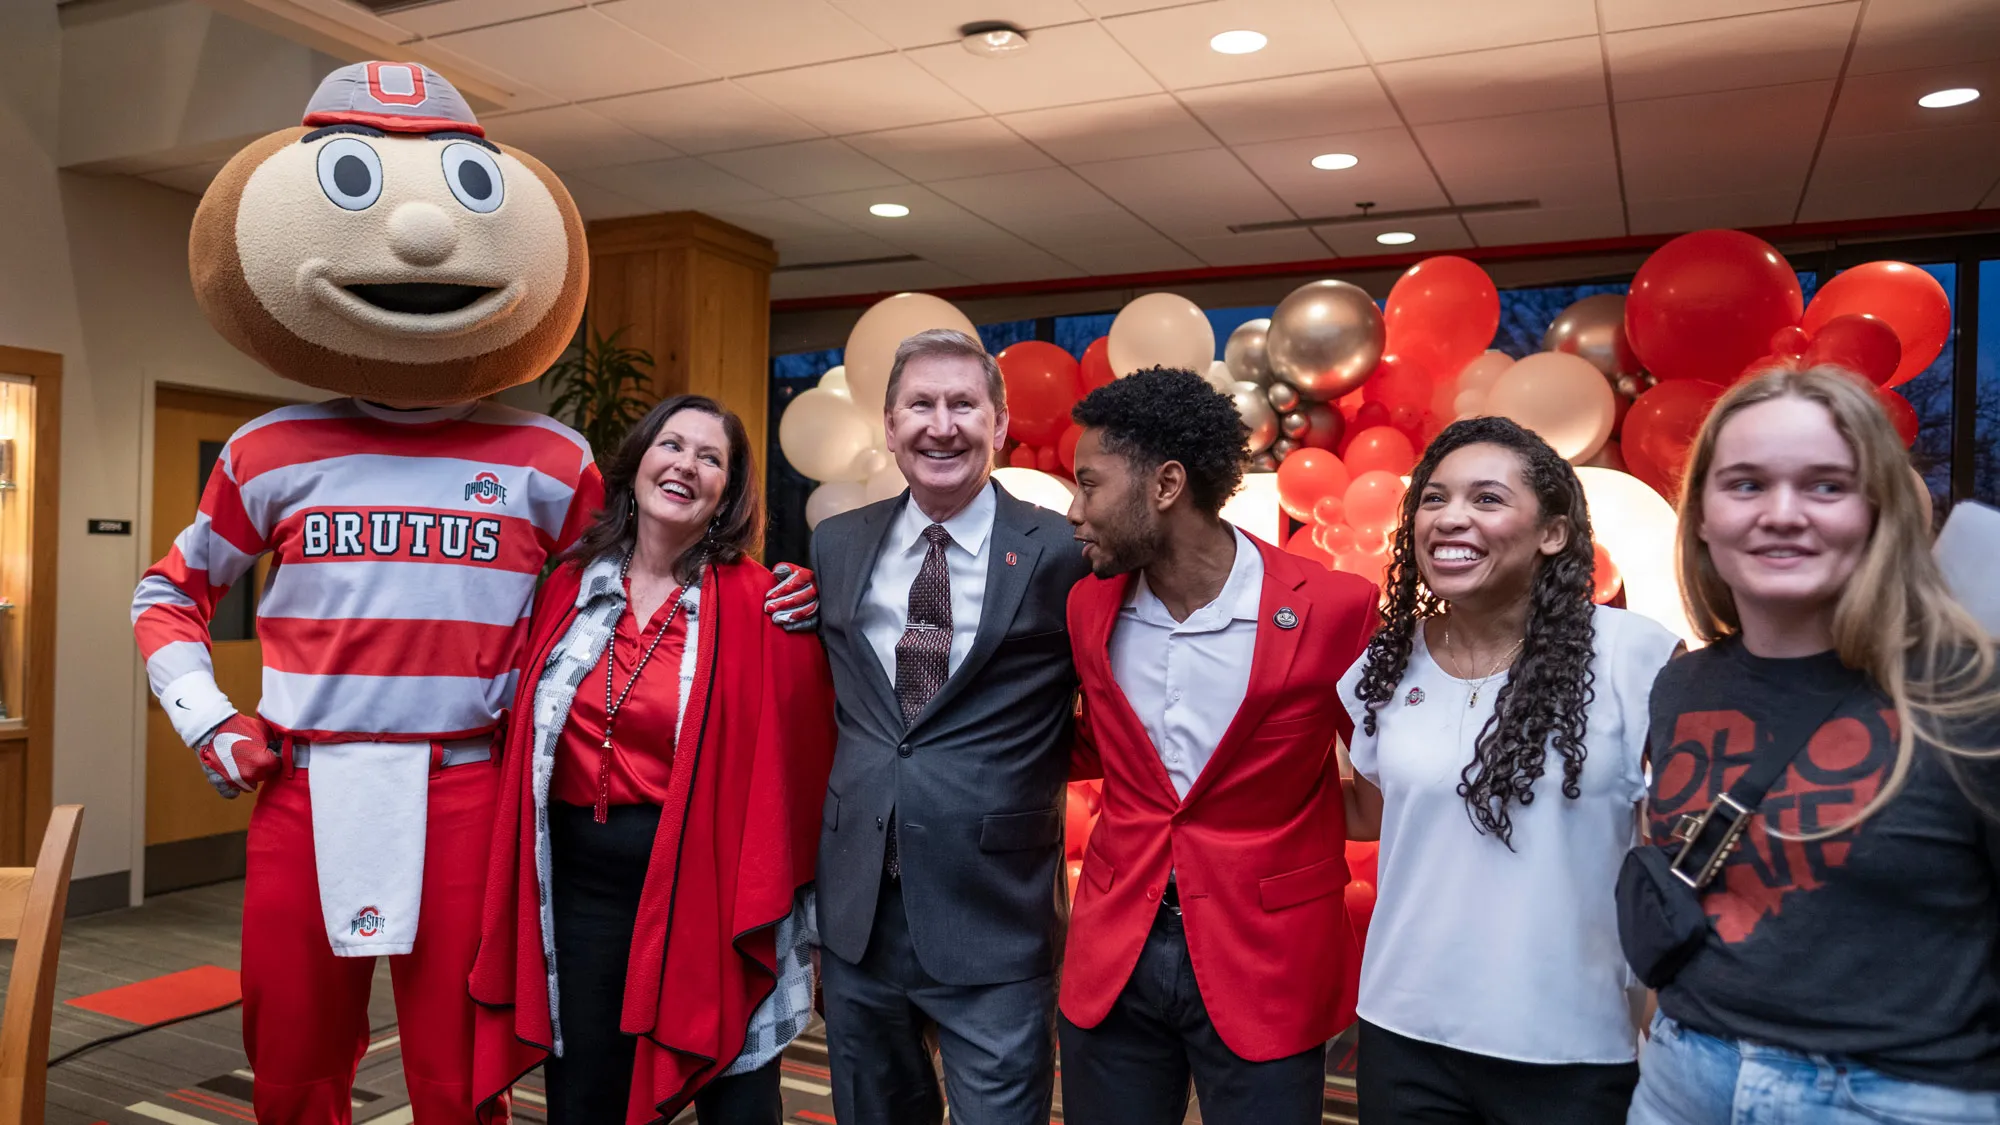 From left, Brutus Buckeye, First Lady Lynda Carter and President Carter, Undergraduate Student Government leaders Bobby McAlpine and Madison Mason, and another young woman line up at a student welcome reception in the Union. They have their arms wrapped around each others’ shoulders and are all laughing.